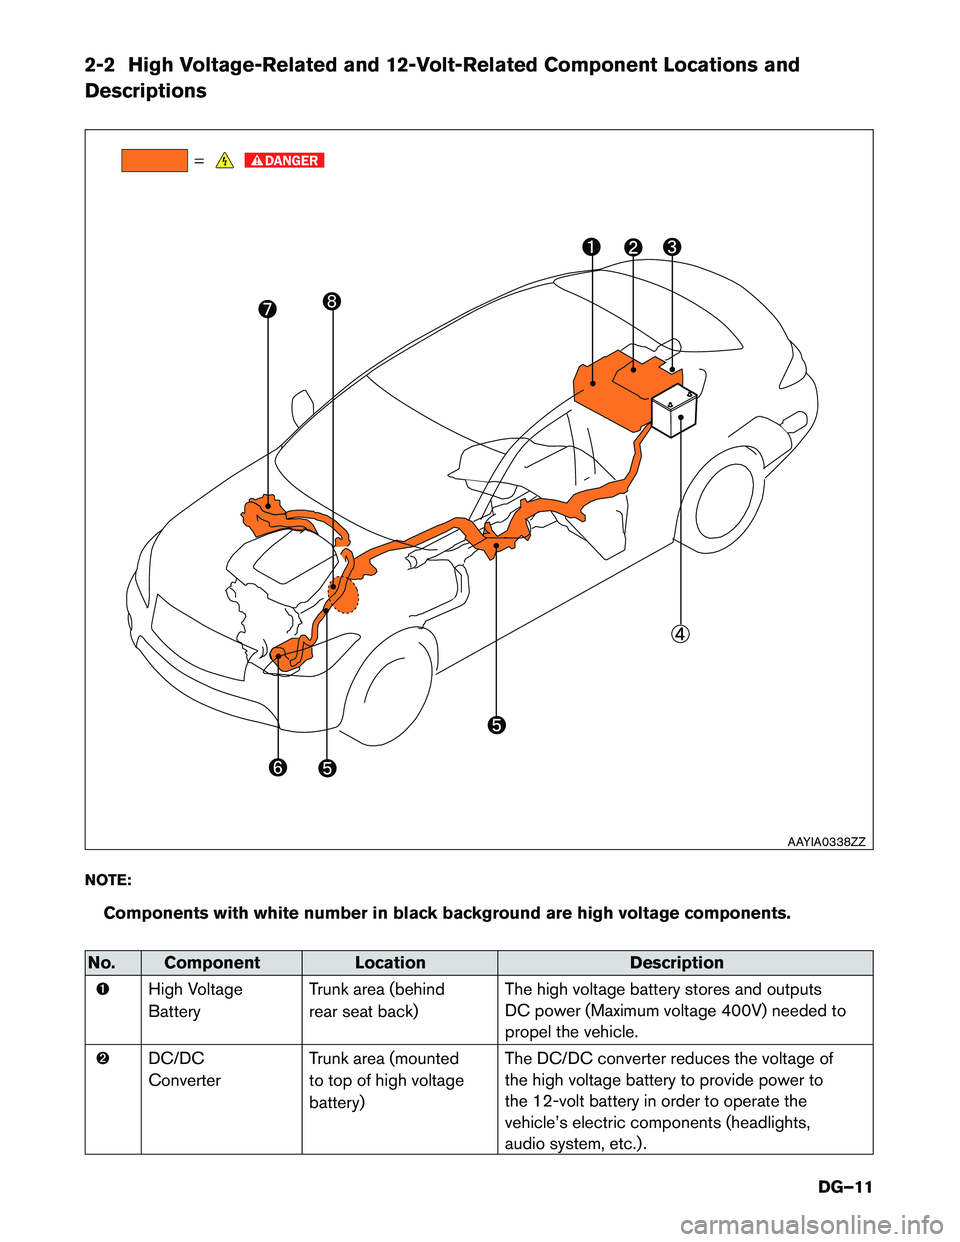 INFINITI Q70 HYBRID 2015  Dismantling Guide 2-2 High Voltage-Related and 12-Volt-Related Component Locations and Descriptions 
NOTE:Components with white number in black background are high voltage components.
No. Component Location Description